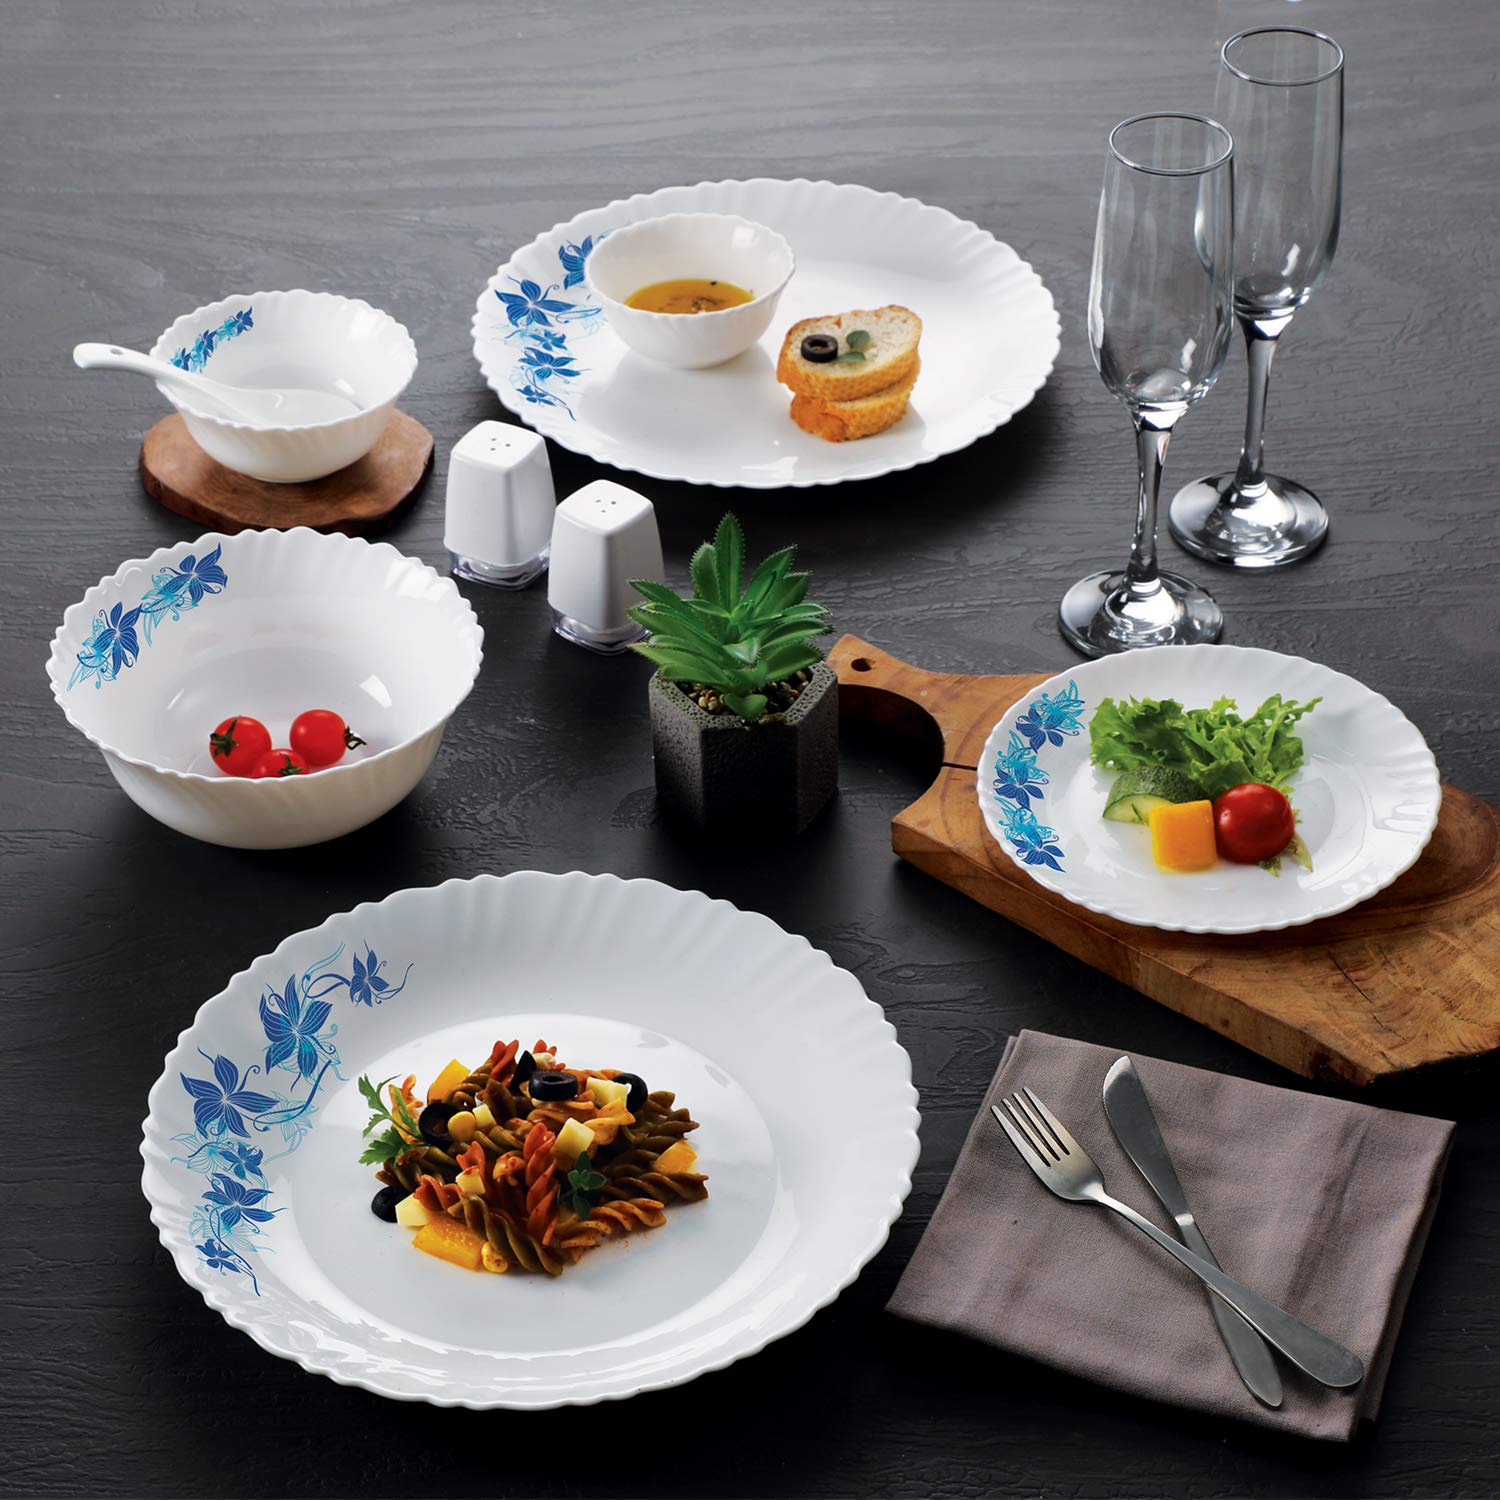 Dazzle Series 35 Pieces Opalware Dinner Set for Family of 6 Blue Swirl / With Multipurpose Bowl